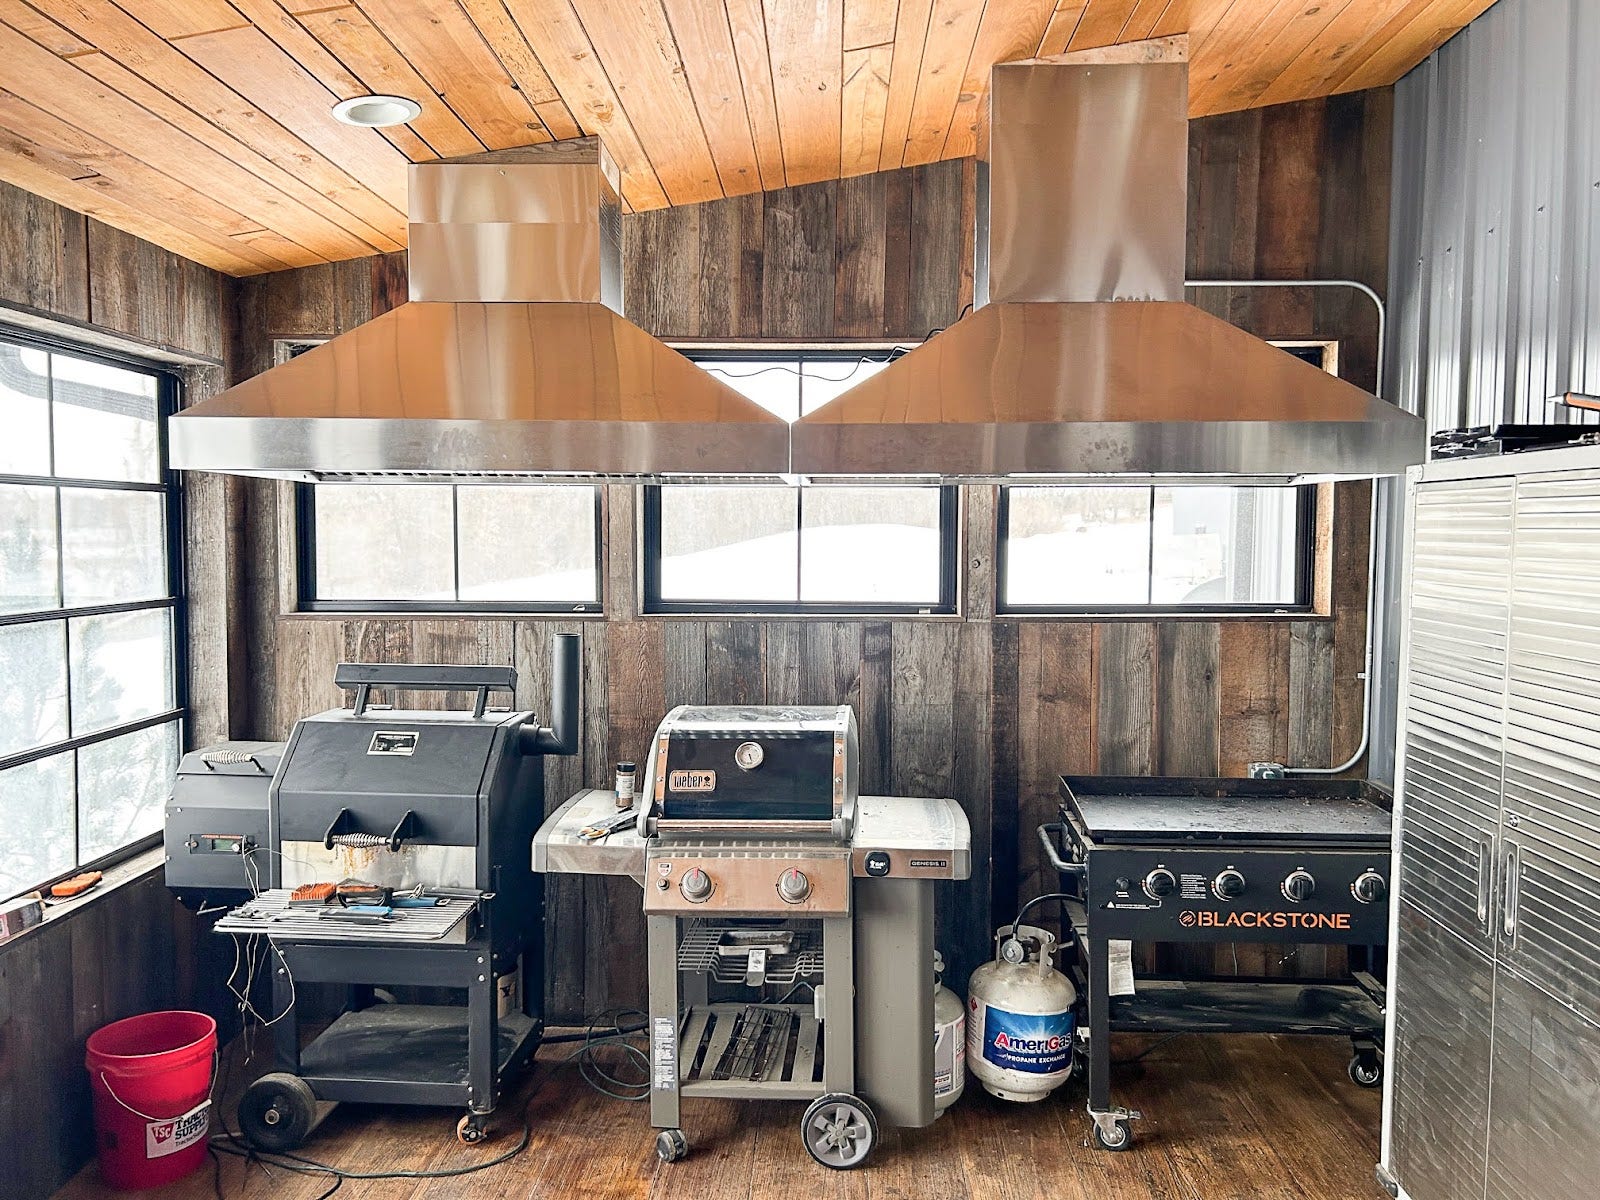 Industrial Rustic Kitchen: Raw wood walls and dual PLJI 103 range hoods create a bold, industrial-rustic atmosphere. The wide stainless steel hoods handle serious cooking with ease, venting smoke from grills under the large windows filled with natural light. Embrace the joy of cooking in this unique outdoor space! - Proline Range Hoods - prolinerangehoods.com 